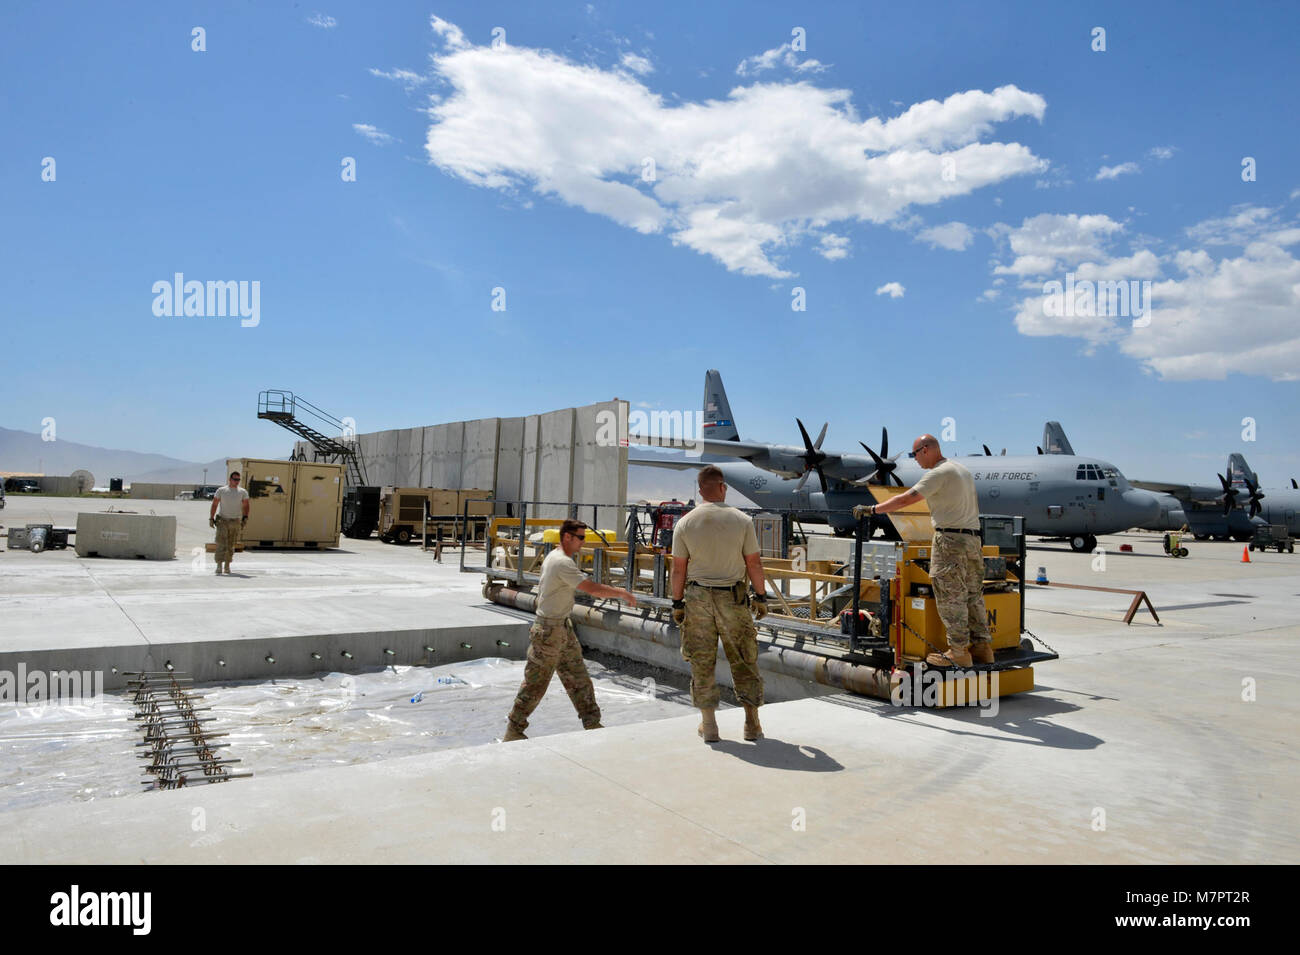 U.S. Air Force Airmen with the 455th Expeditionary Civil Engineer Squadron prepare to pour concrete on the flightline at Bagram Airfield, Afghanistan May 22, 2014. The 455 ECES ensures operability of the airfield by providing airfield maintenance, construction and operation for the senior airfield authority mission. (U.S. Air Force photo by Staff Sgt. Evelyn Chavez/Released) 455th Air Expeditionary Wing Bagram Airfield, Afghanistan Stock Photo